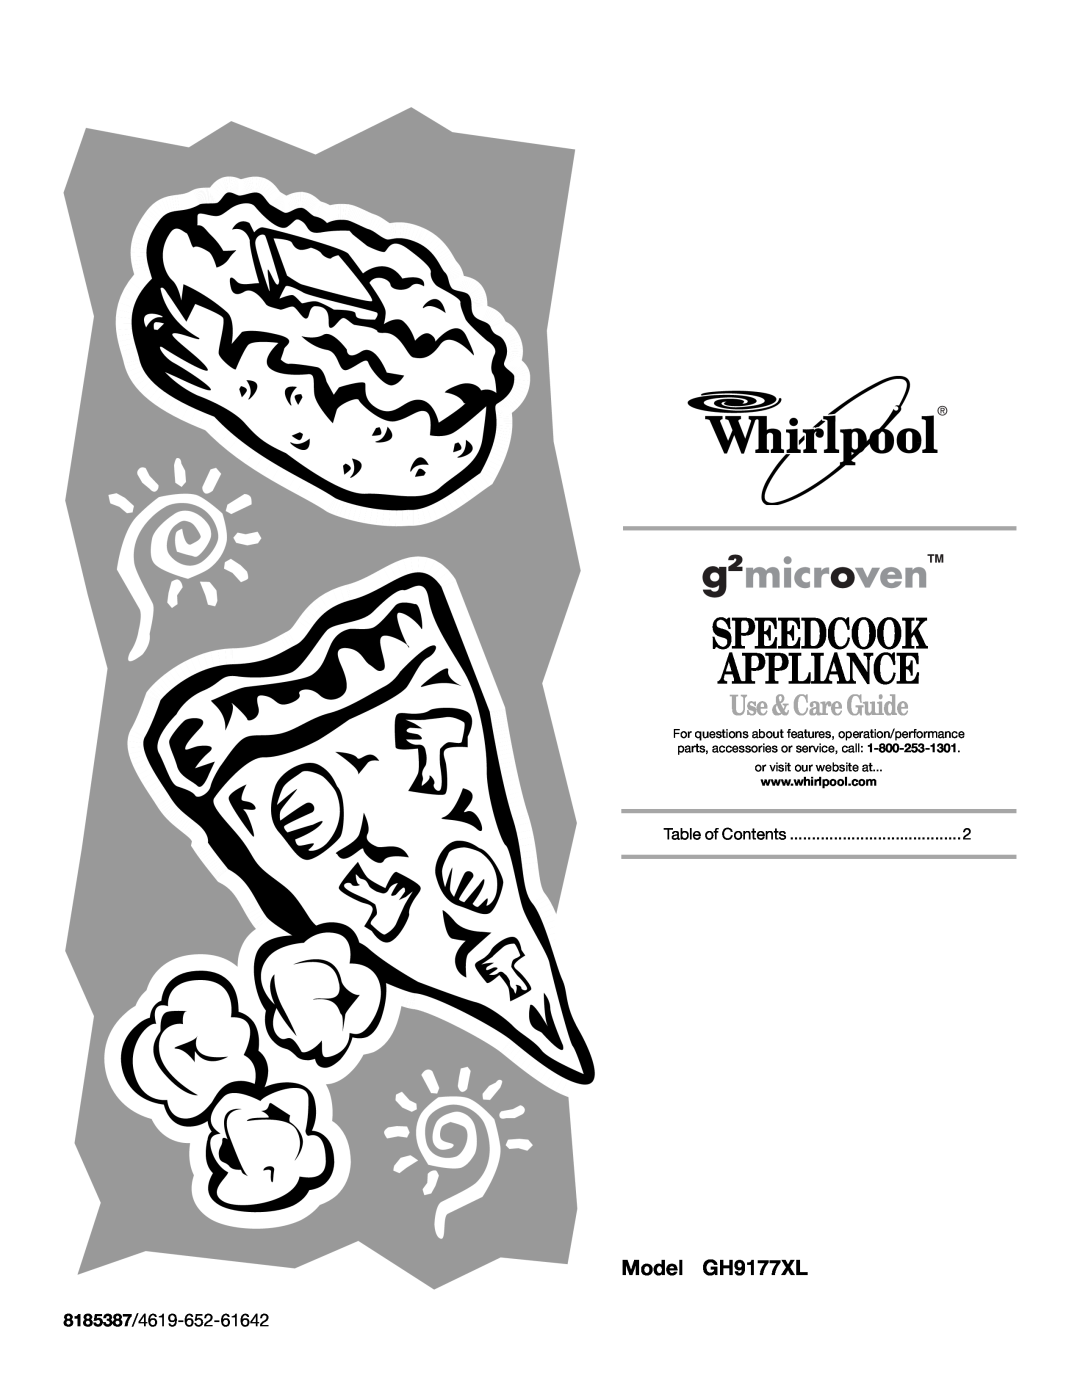 Whirlpool Micro oven manual Speedcook Appliance, Use & Care Guide, Model GH9177XL, 8185387/4619-652-61642 